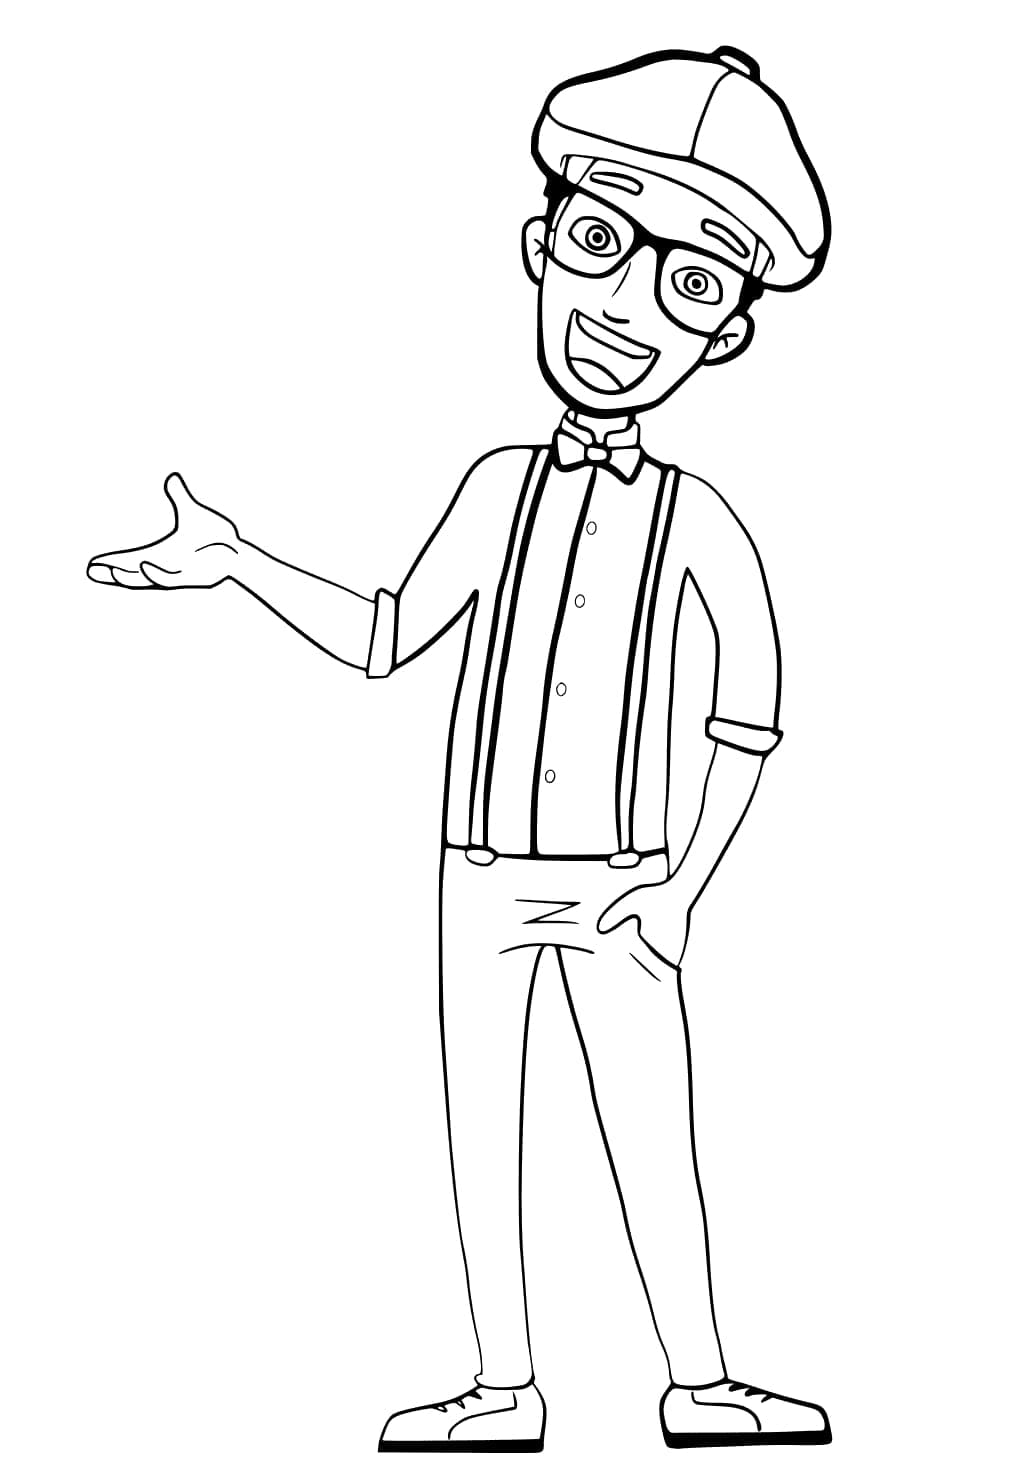 Blippi Coloring Pages | 25 Coloring Pages Free Printable